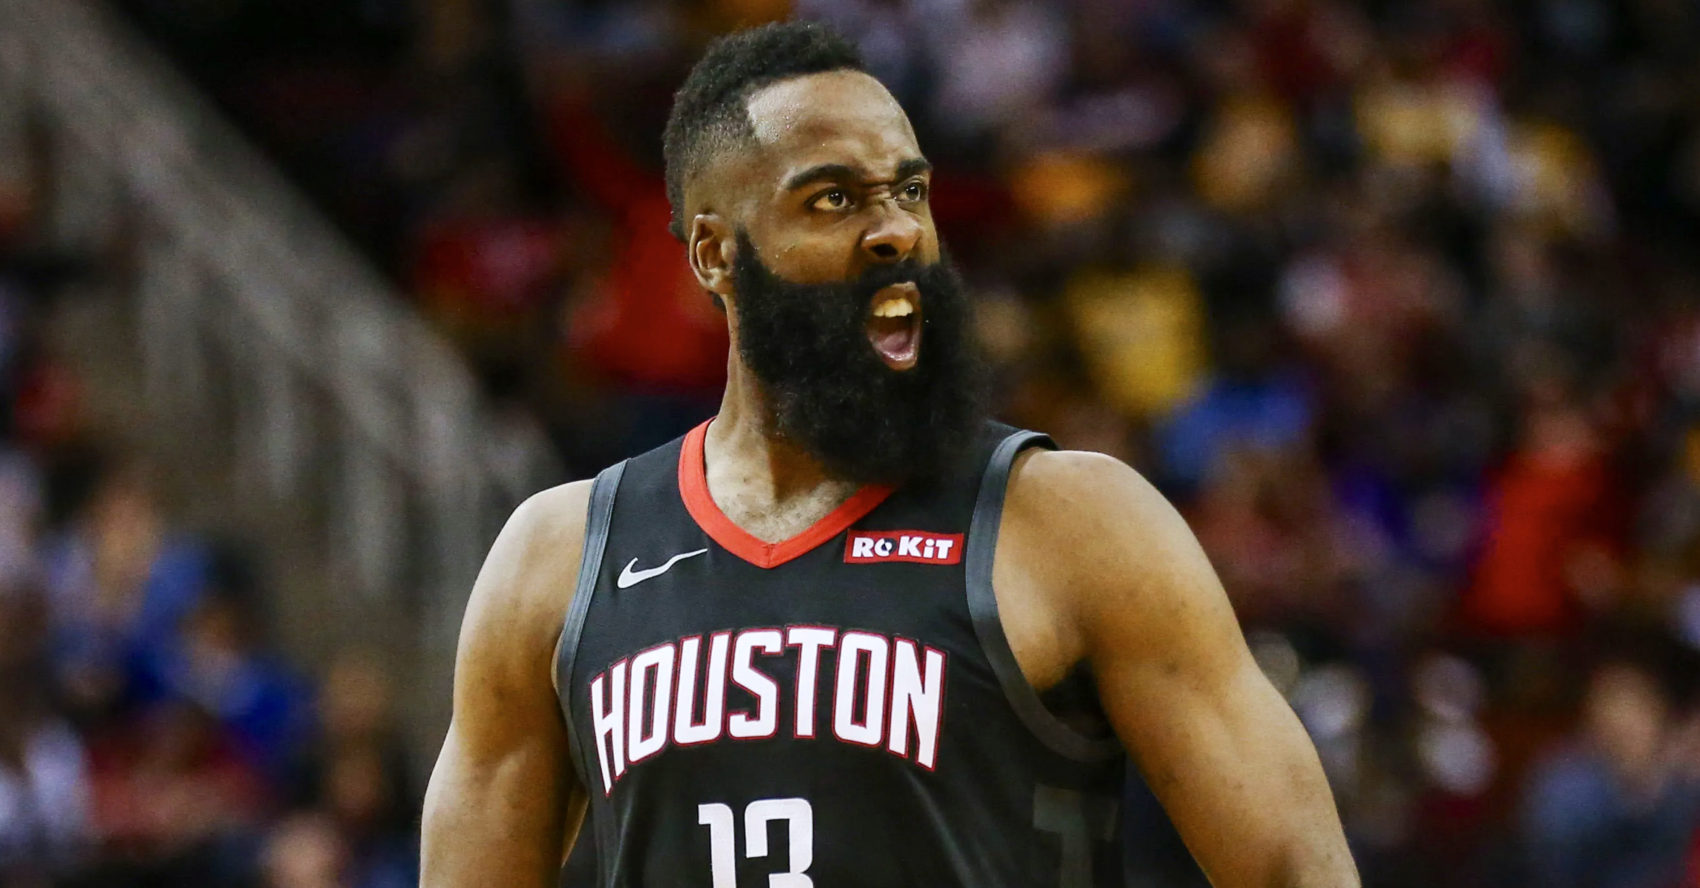 Harden flexes and smiles as the Rockets have enjoyed success with their MVP leading the way.